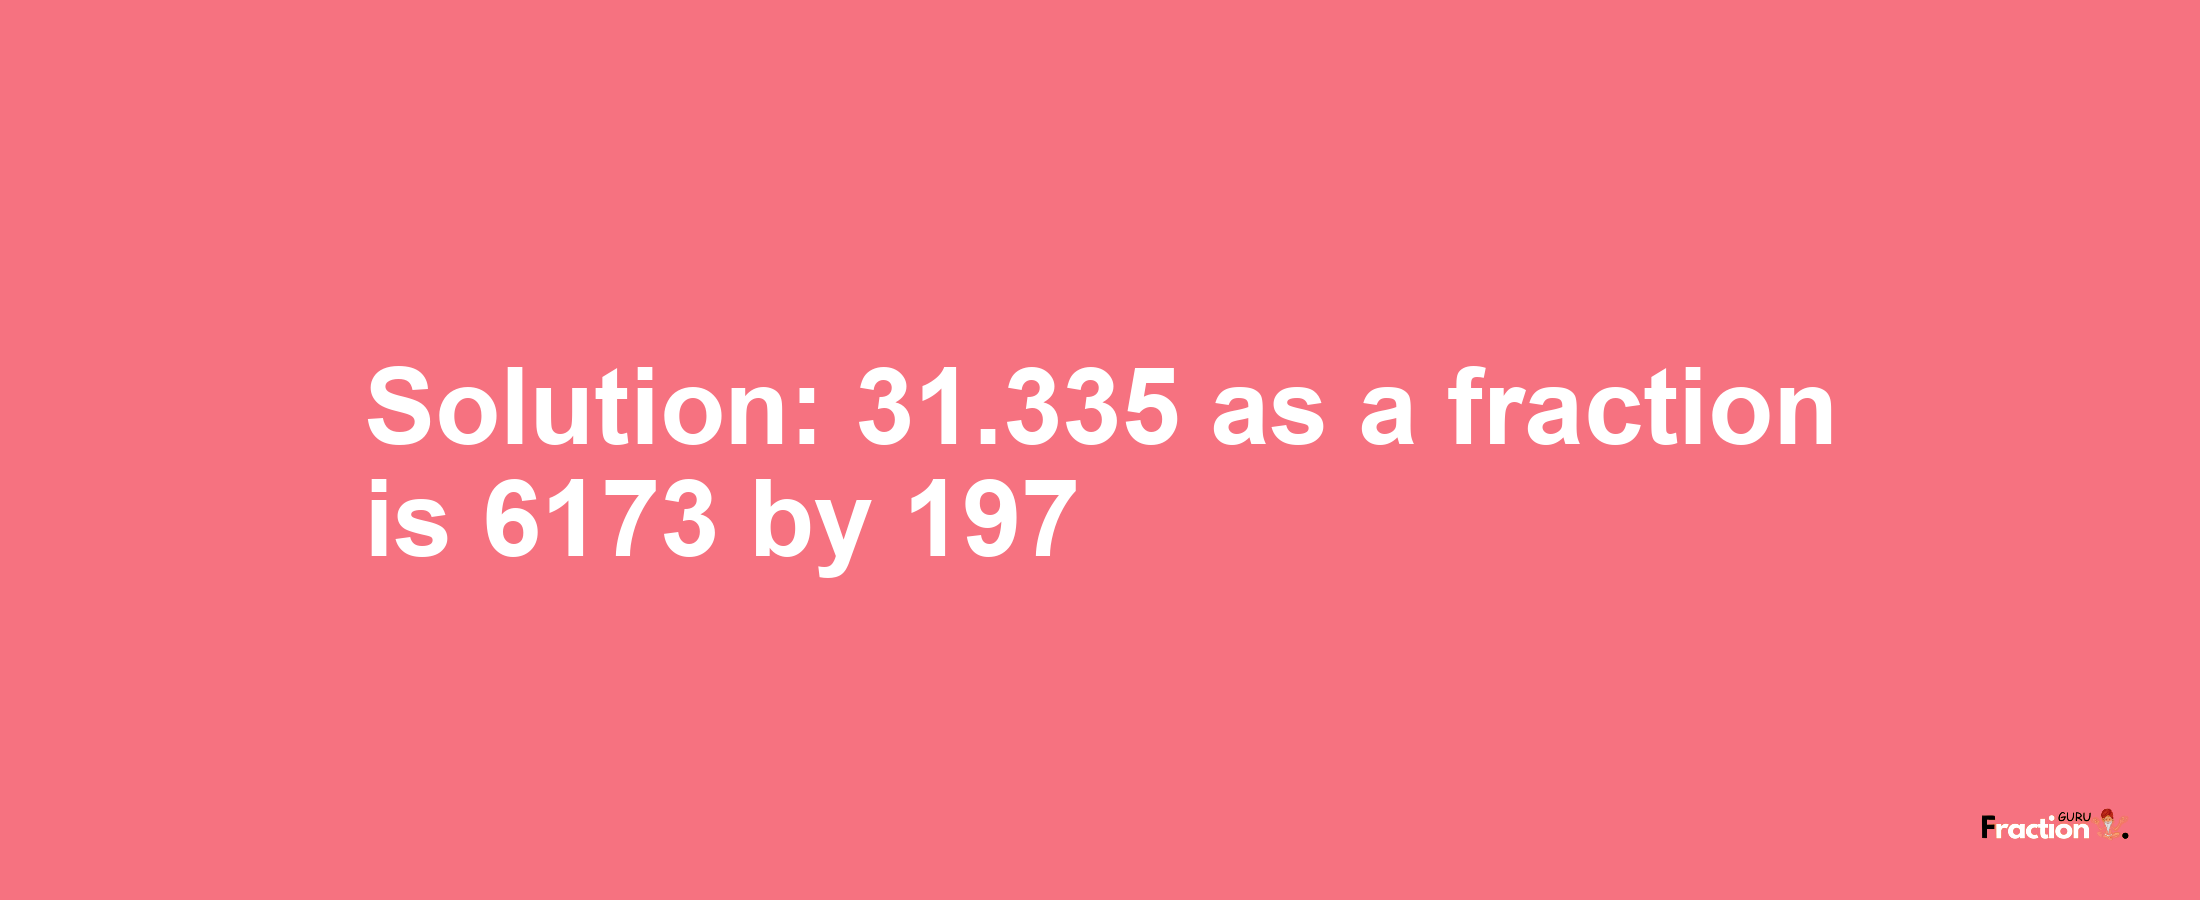 Solution:31.335 as a fraction is 6173/197